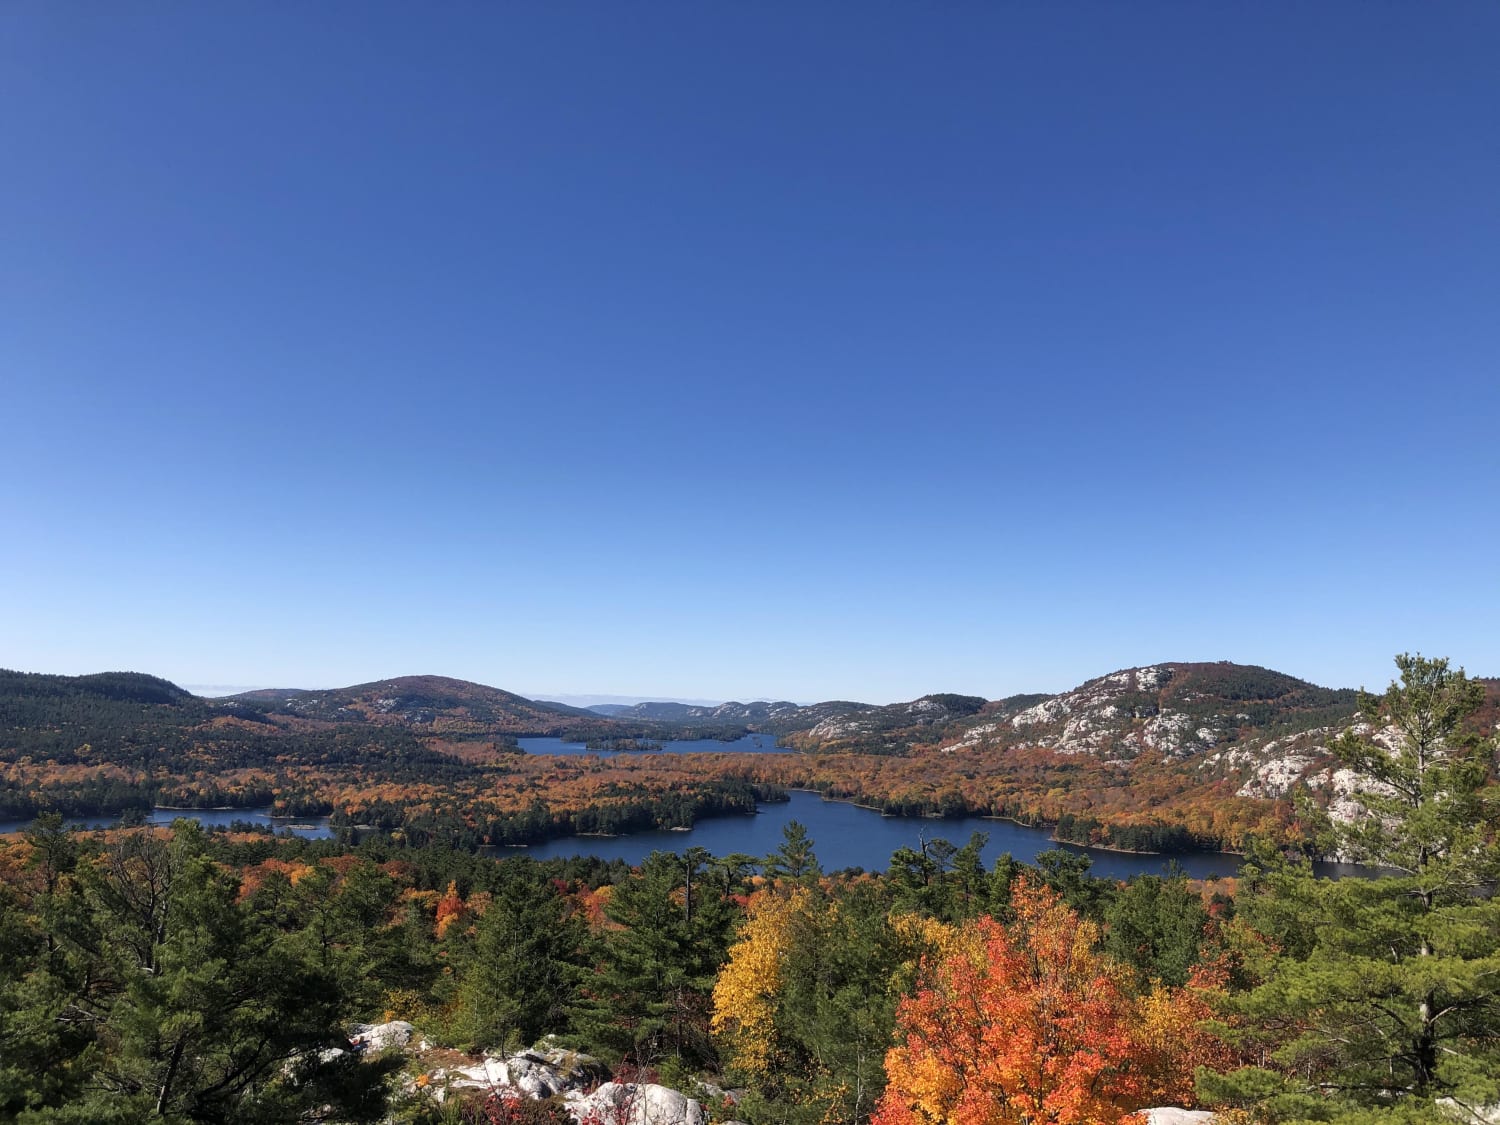 Human nature is missing what we don't have and complaining about what we do. So this hot summer, I'm thinking back to last year's fall. Killarney ON likely has the best fall views after a above average tough hike...